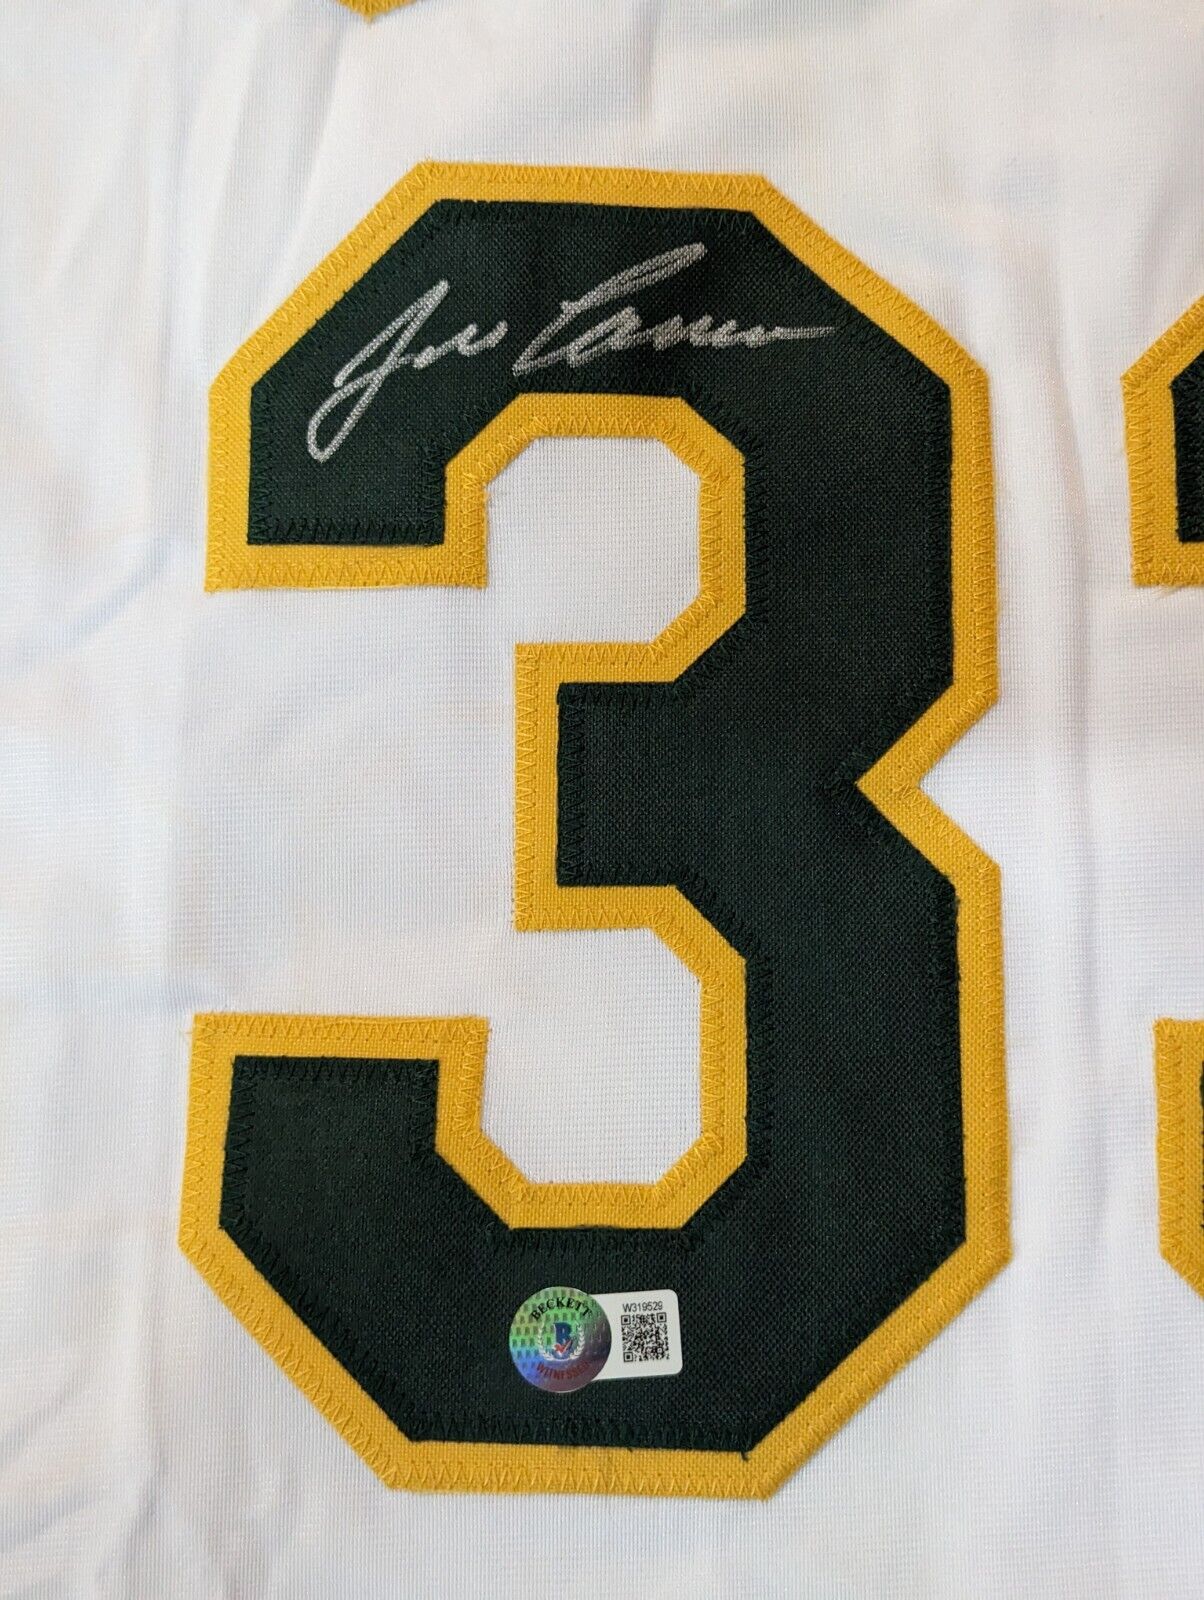 Jose Canseco Autographed and Framed Oakland Athletics Jersey